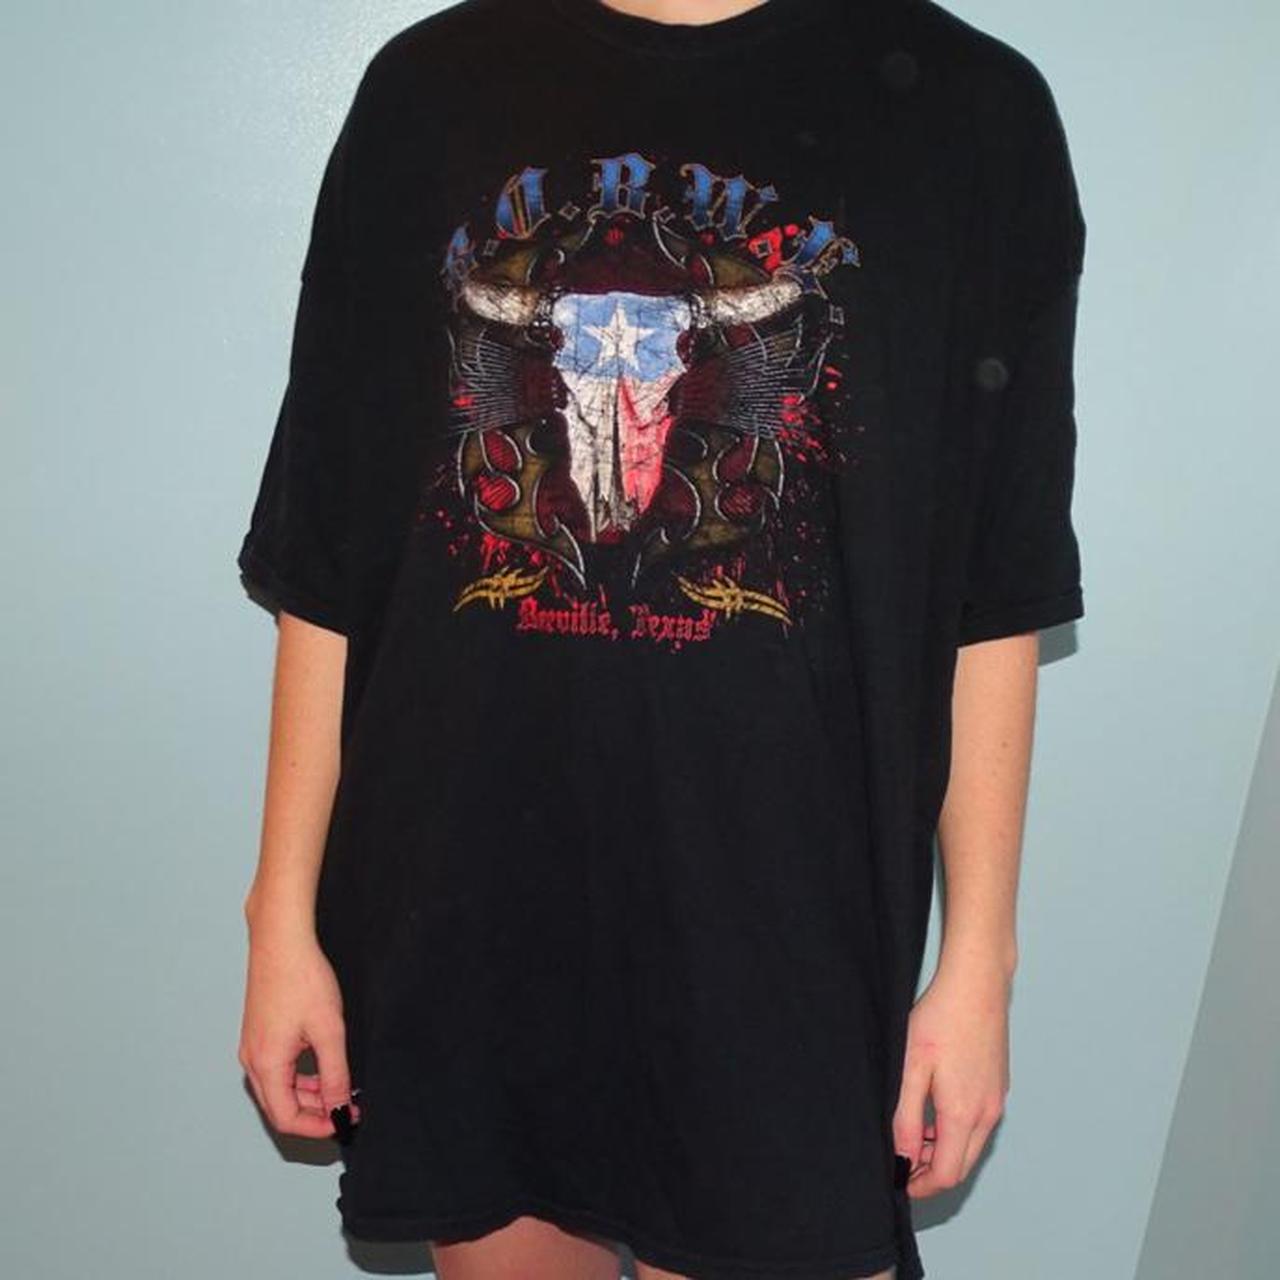 Product Image 3 - mall goth tee 
size:2XL
brand:gildan
condition:10/10
model: size